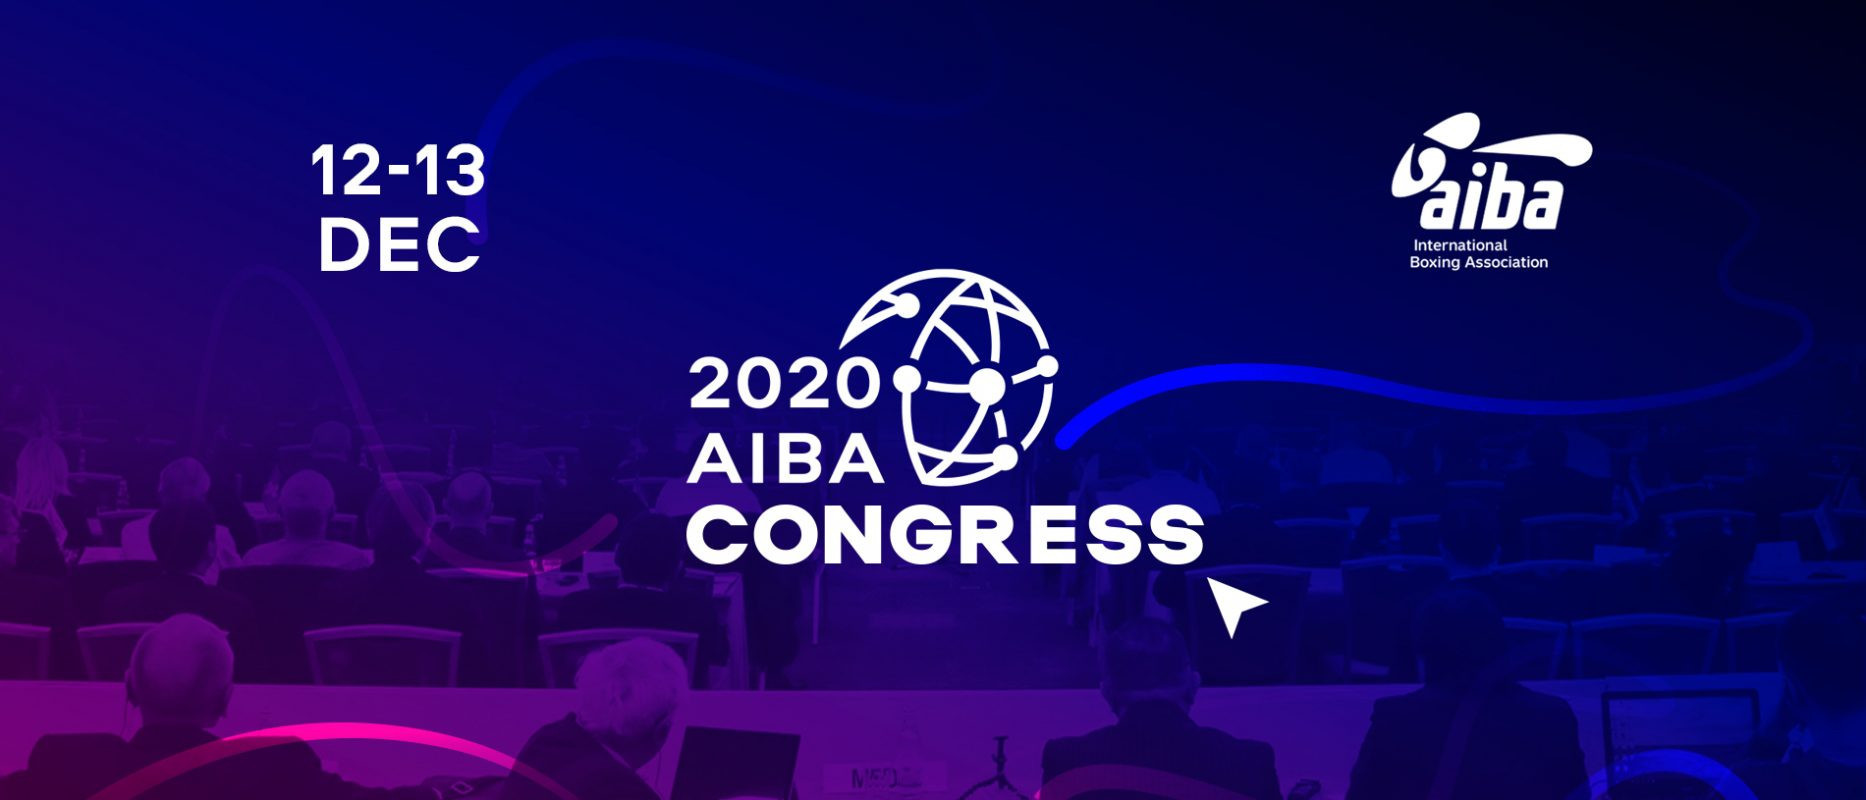 AIBA will elect a new President at the governing body's virtual Congress later this month ©AIBA
